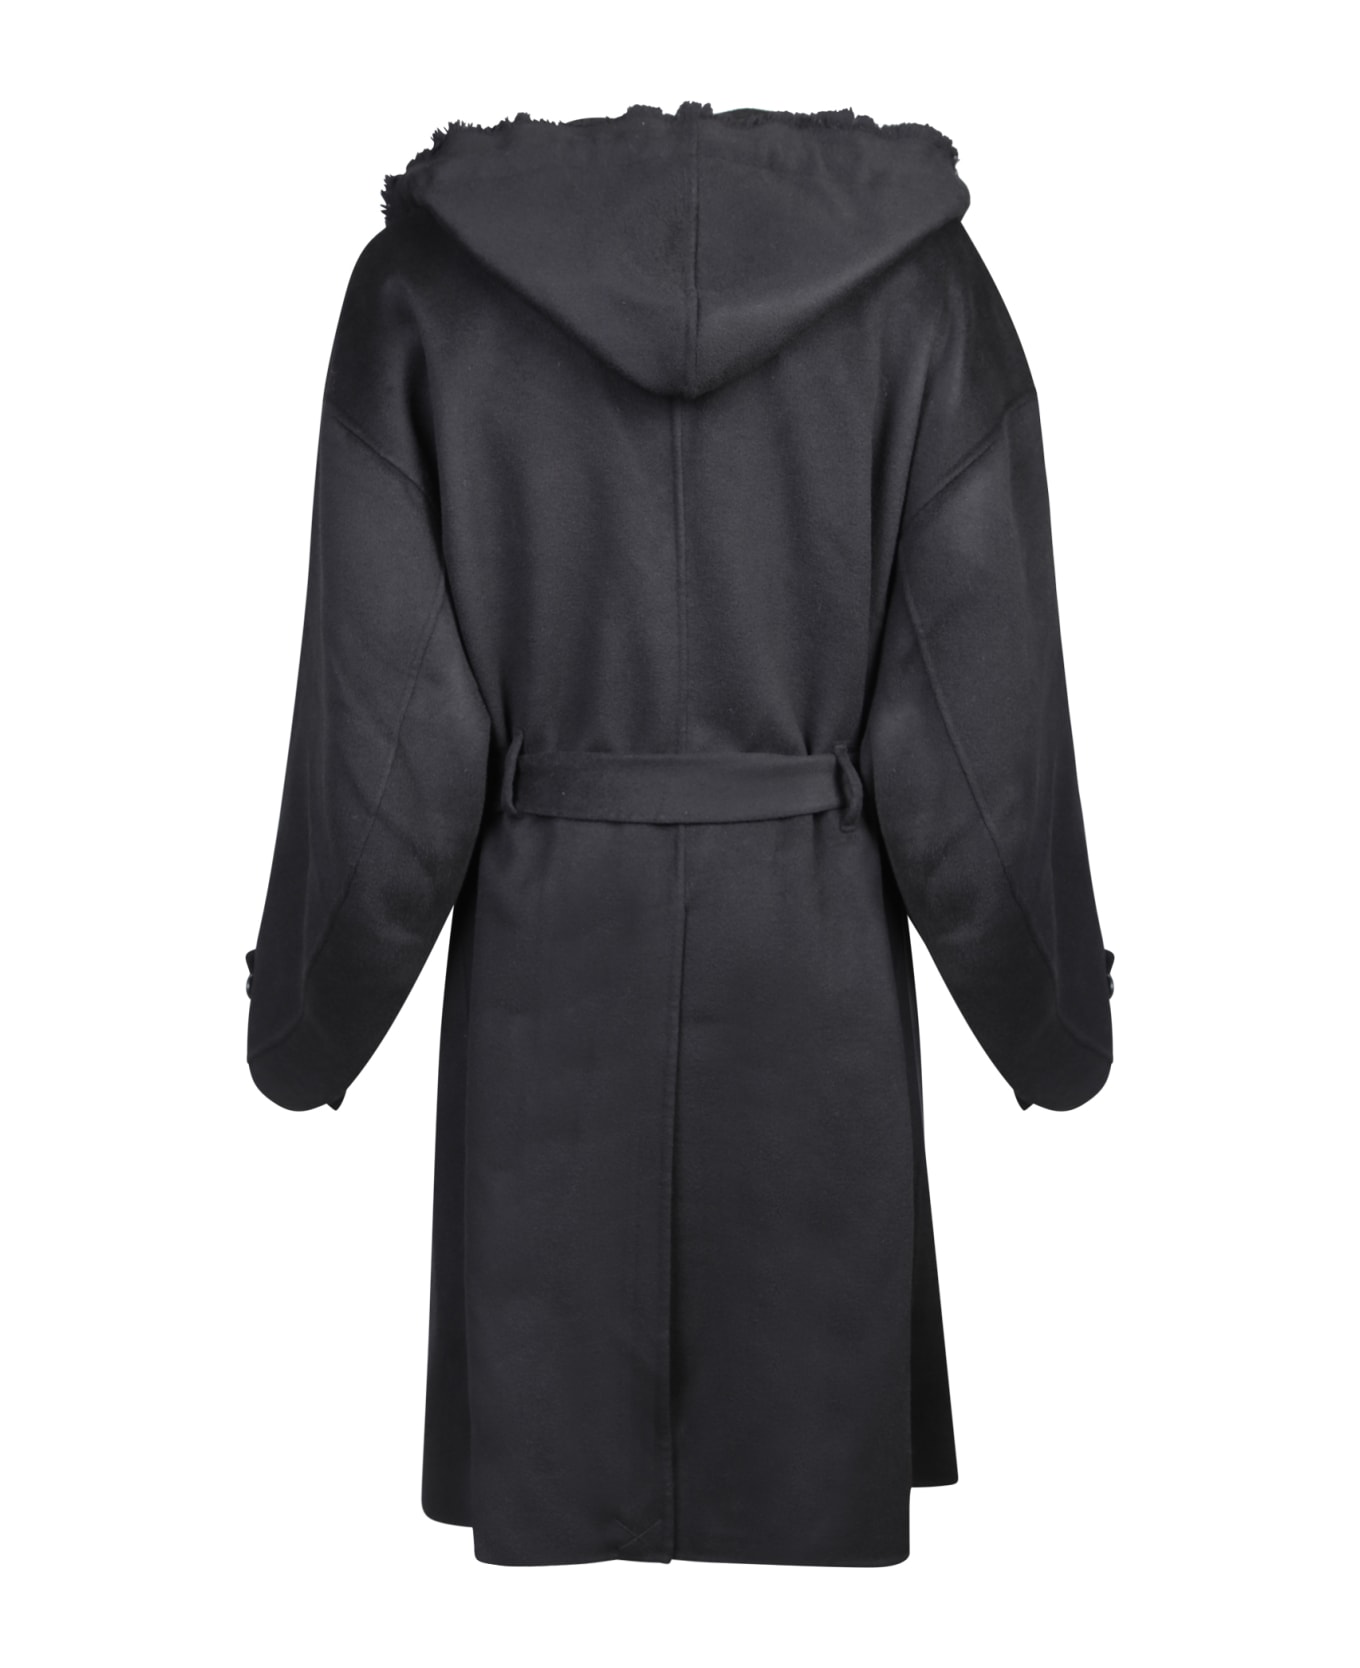 J.W. Anderson Hooded Black Trench Coat - Black